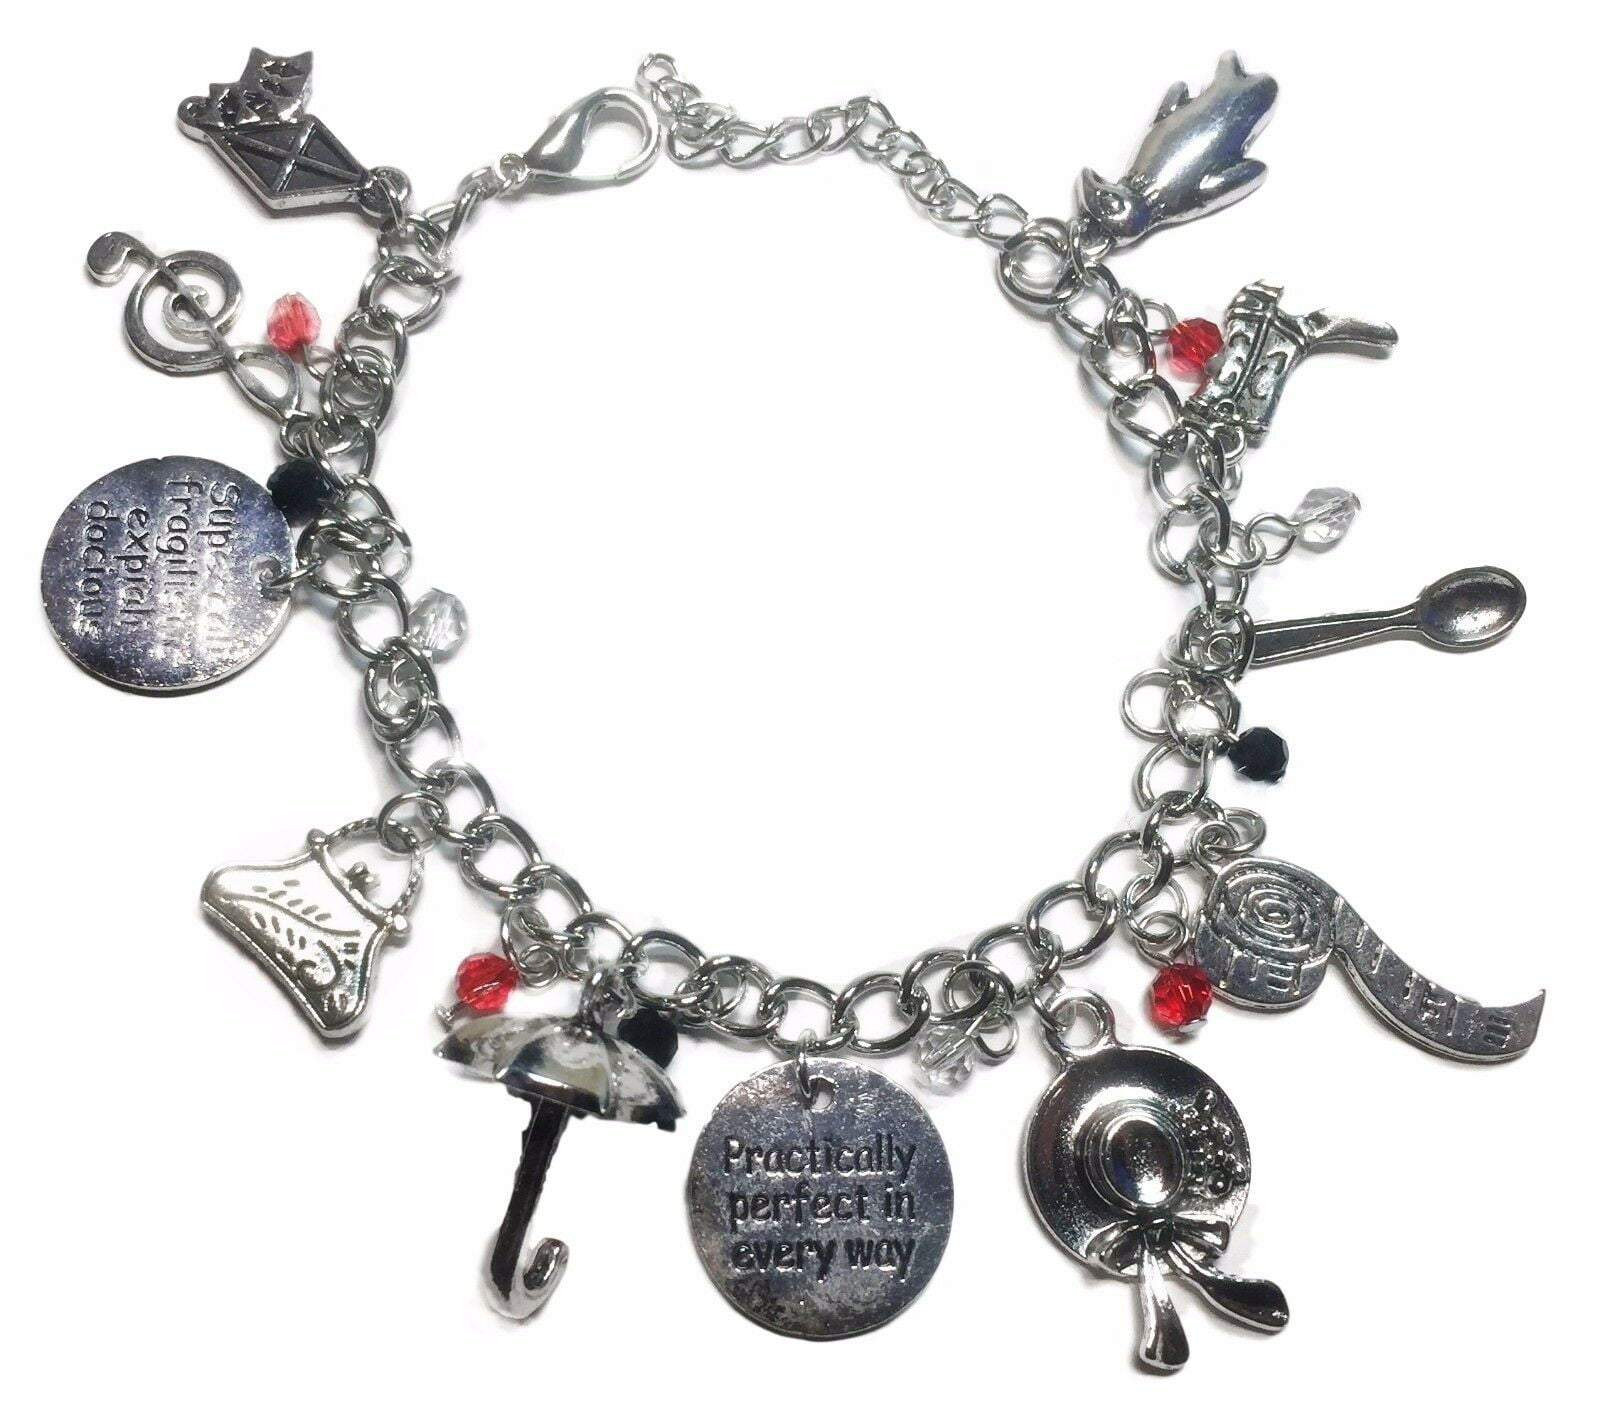 MARY POPPINS CHARM BRACELET SILVER PRACTICALLY PERFECT IN EVERY WAY GIFT BOX BAG